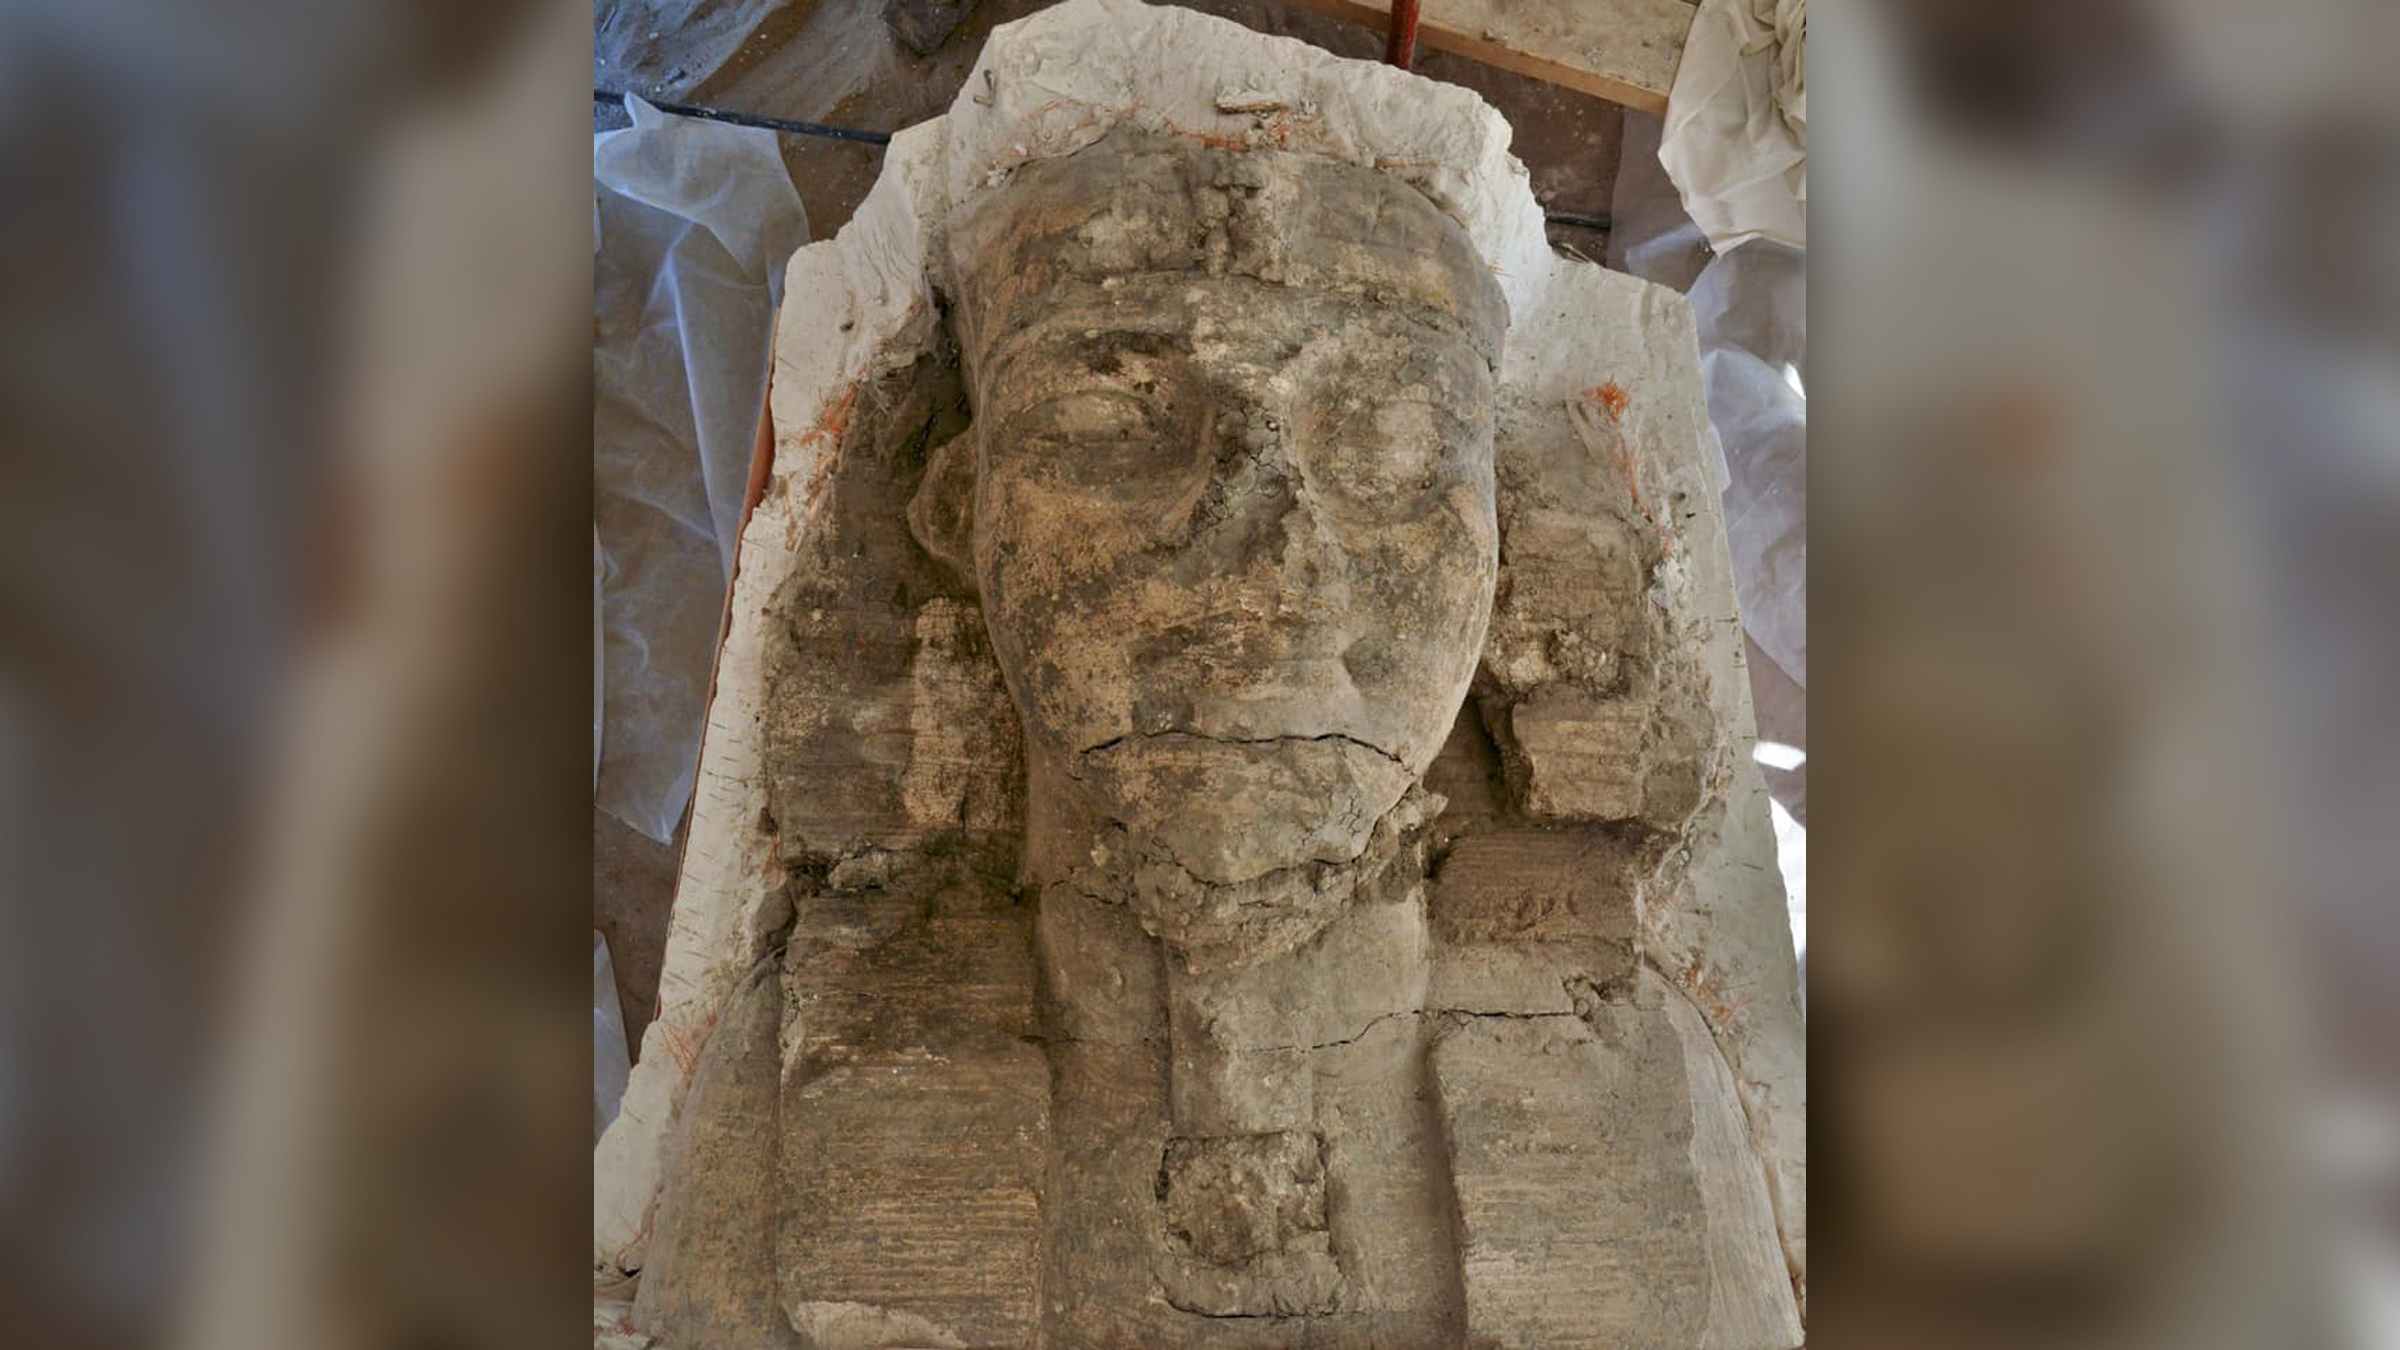 2 giant sphinxes depicting King Tut's grandfather found at ancient Egyptian temple